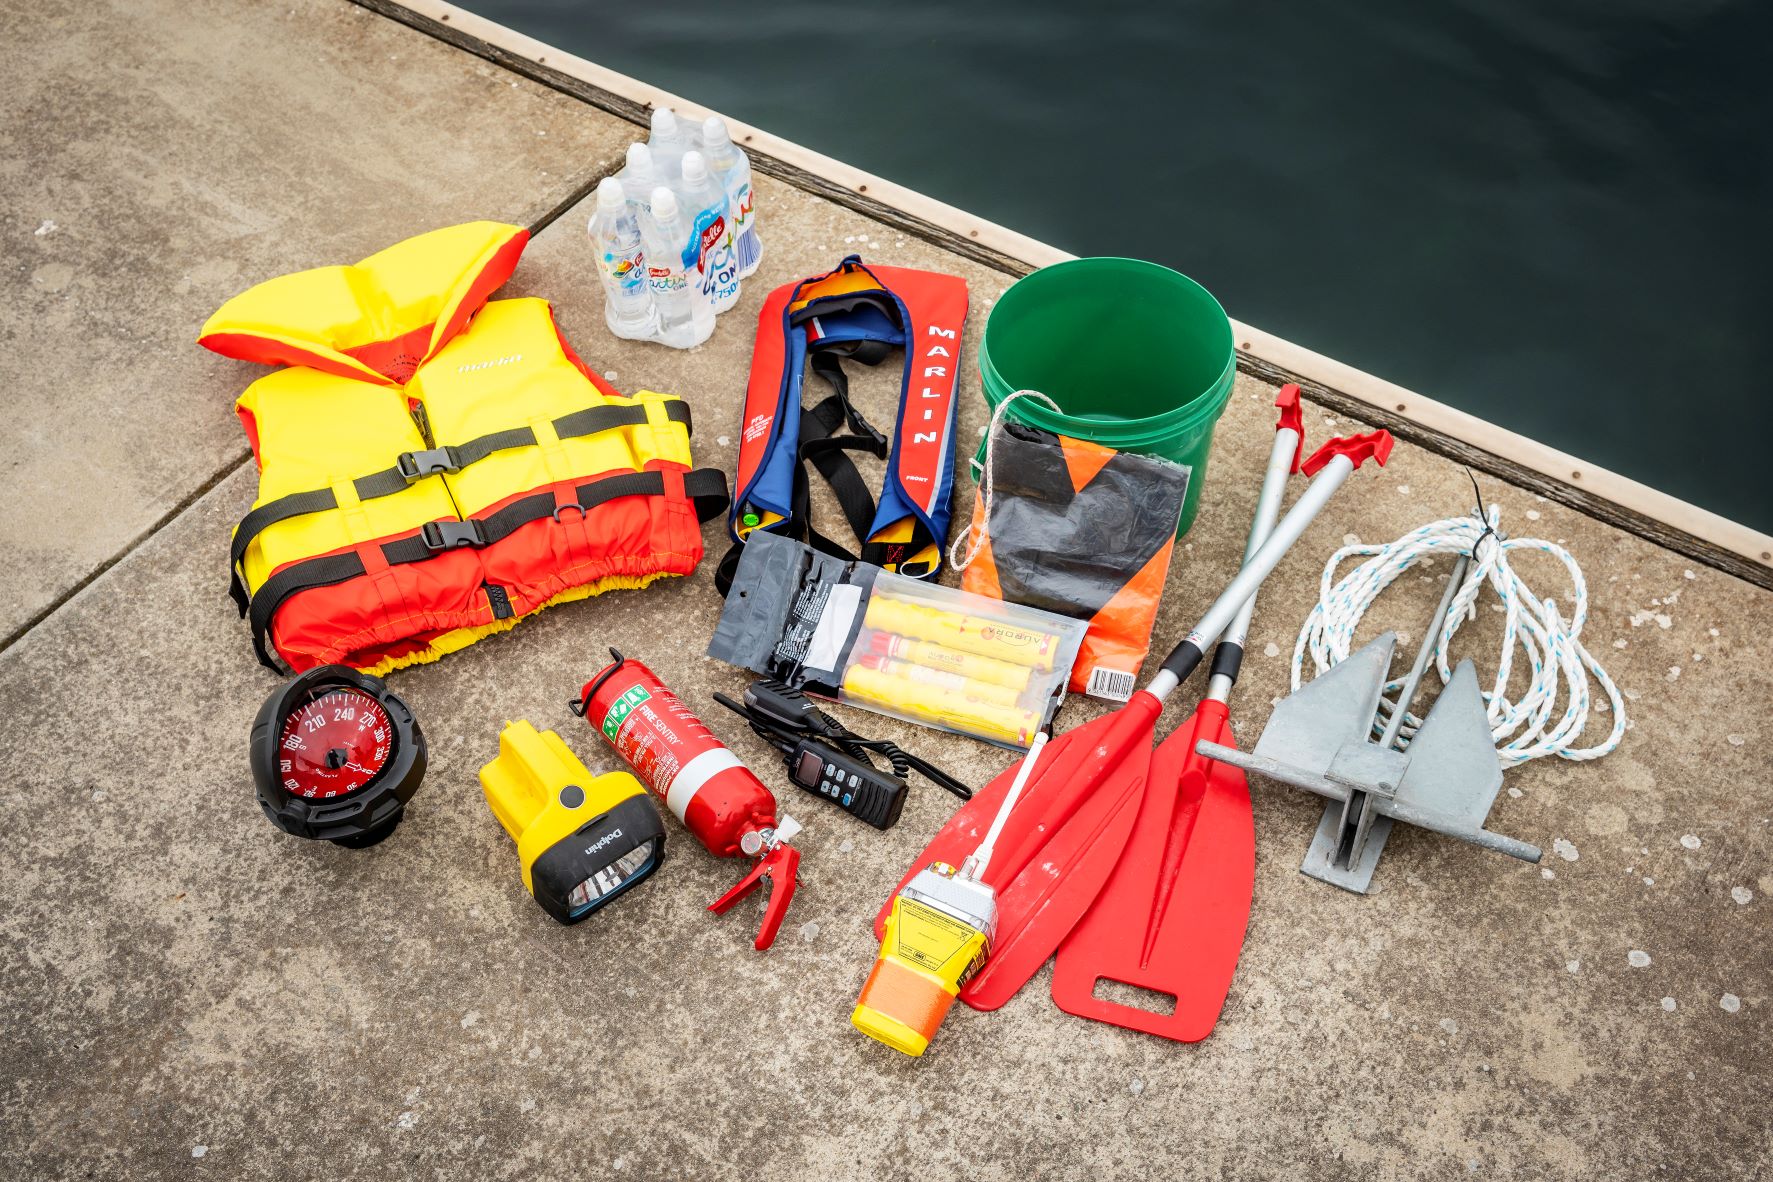 Range of safety equipment laid out on a wharf - lifejacket, compass, torch, fire extinguishers, EPIRB, paddles, flares, radio, anchor, bucket, V sheet, bottled water